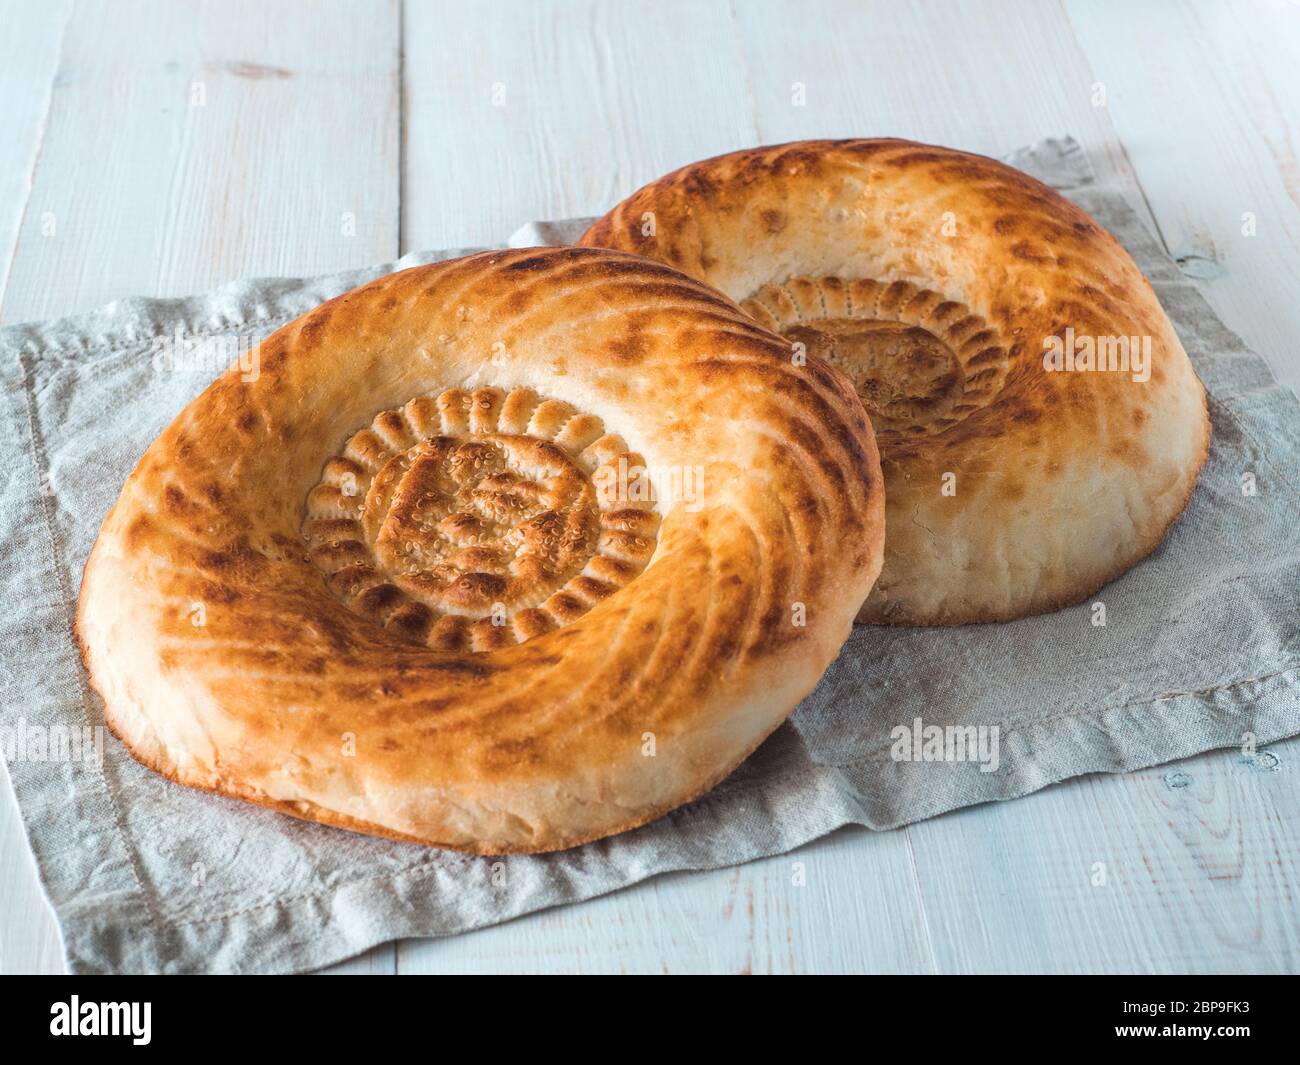 Tasty fresh tandoor bread on white wooden table. Two tandoor flat bread cake on linen kitchen towel or napkin. National asian meal, food, bread. Stock Photo